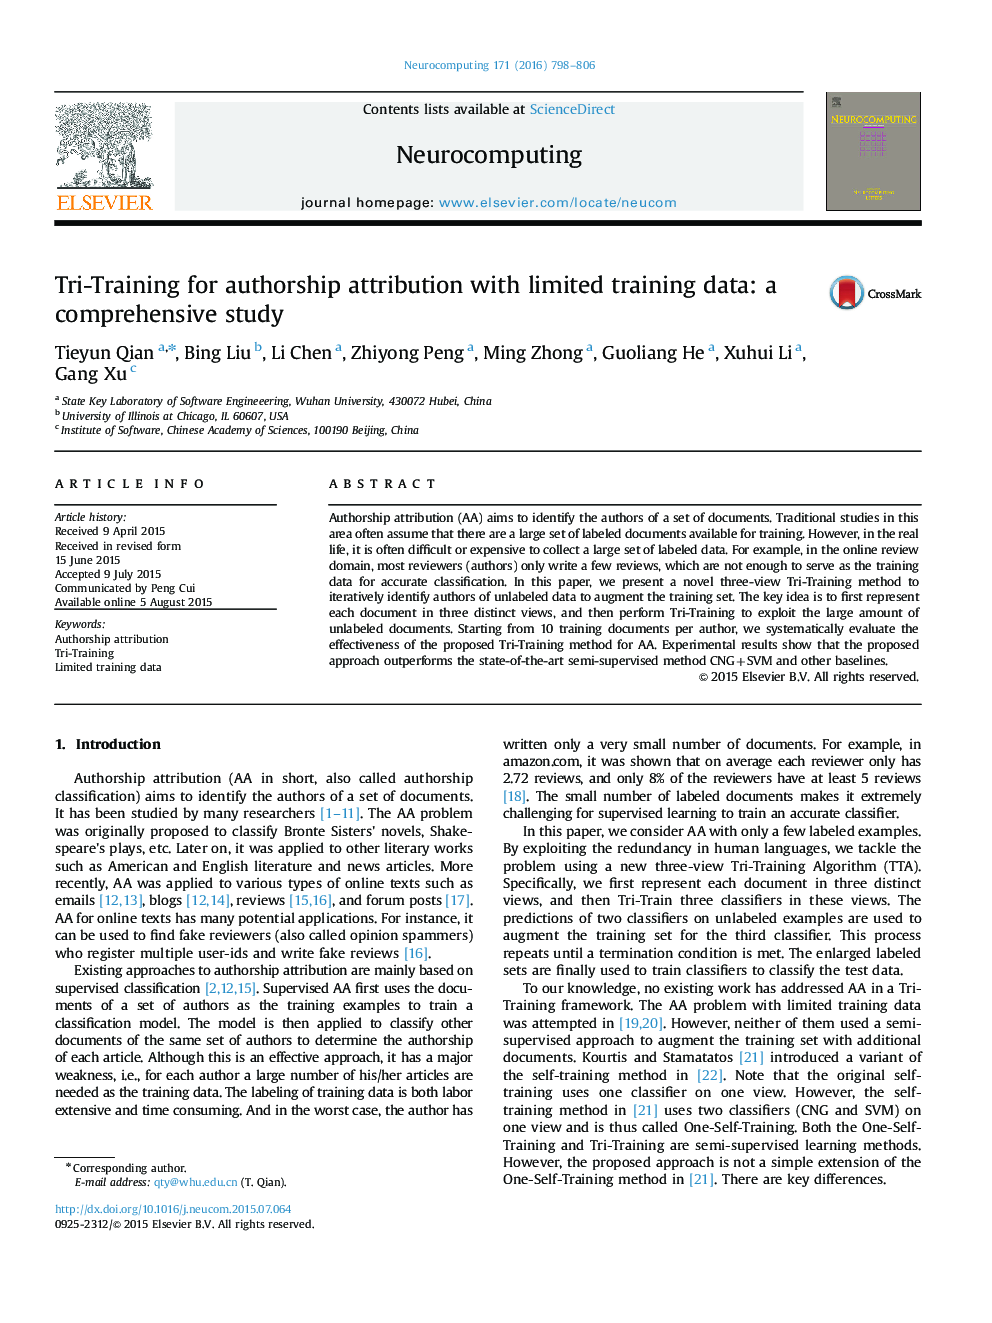 Tri-Training for authorship attribution with limited training data: a comprehensive study